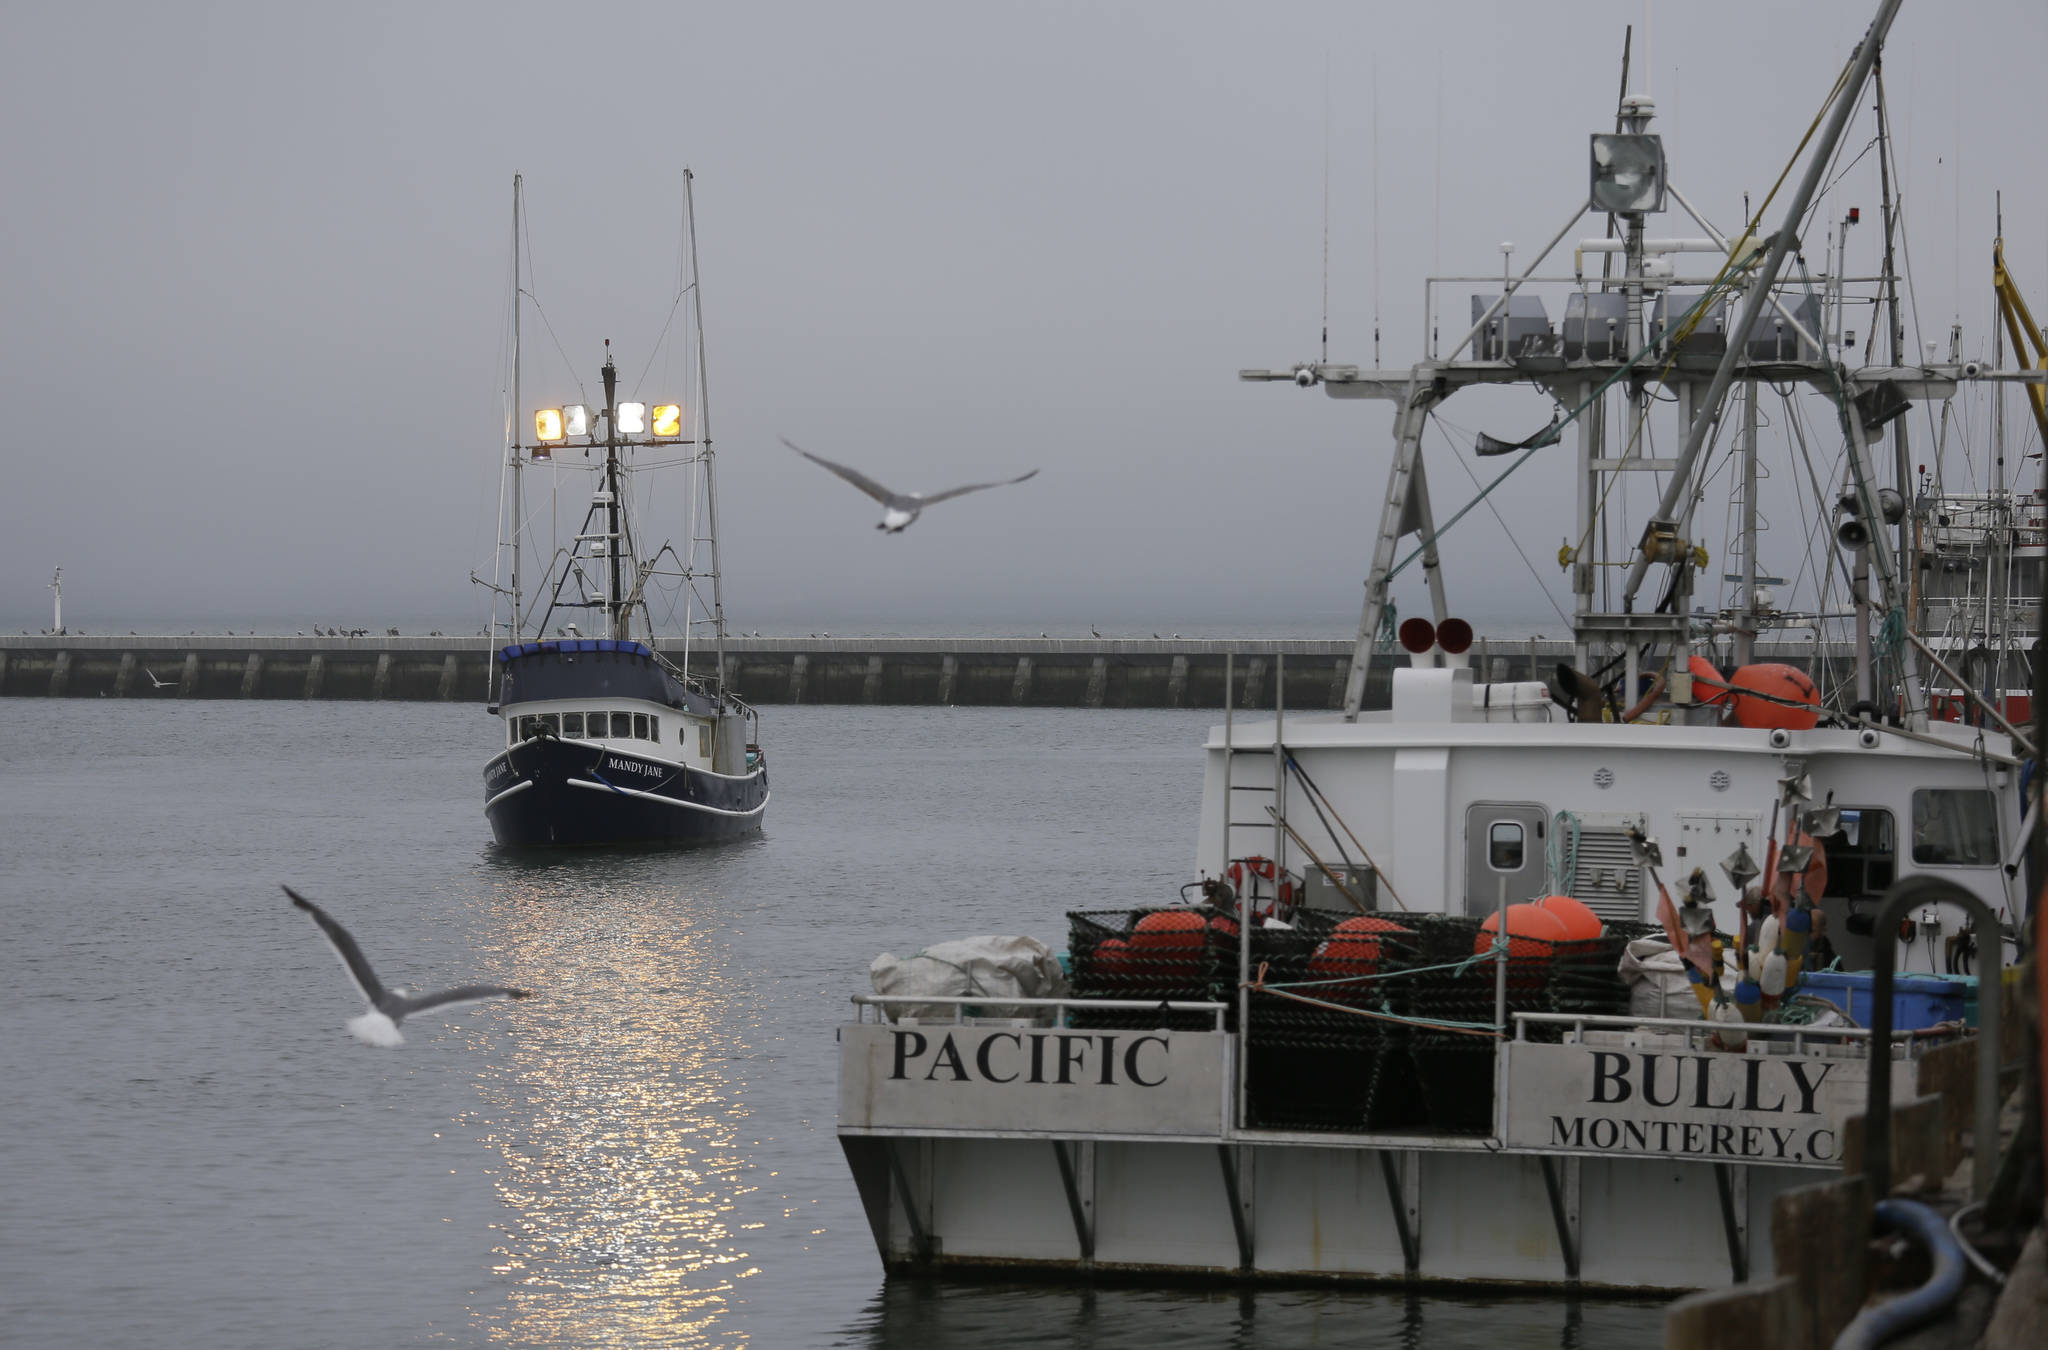 In this photo taken Monday, July 22, 2019, a boat with chinook salmon makes its way to Fisherman’s Wharf to unload its catch in San Francisco. California fishermen are reporting one of the best salmon fishing seasons in more than a decade, thanks to heavy rain and snow that ended the state’s historic drought. It’s a sharp reversal for chinook salmon, also known as king salmon, an iconic fish that helps sustain many Pacific Coast fishing communities.(AP Photo/Eric Risberg)